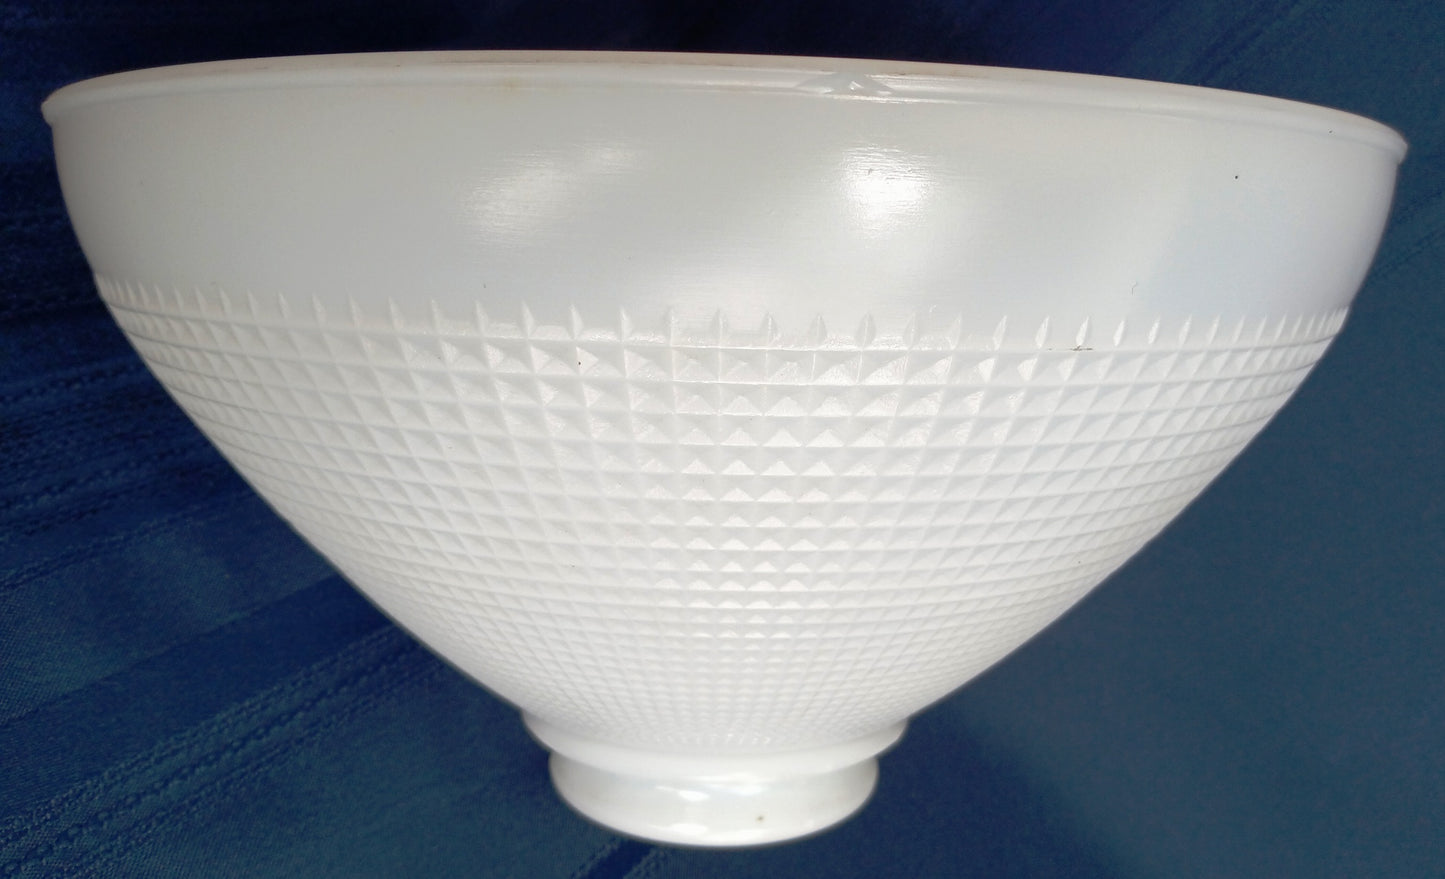 Corning Light Diffuser Milk Glass Textured Waffle Design Floor Table Lamp Cone Shade Pendant Torchiere Replacement Globe 3.25” Fitter-VTG